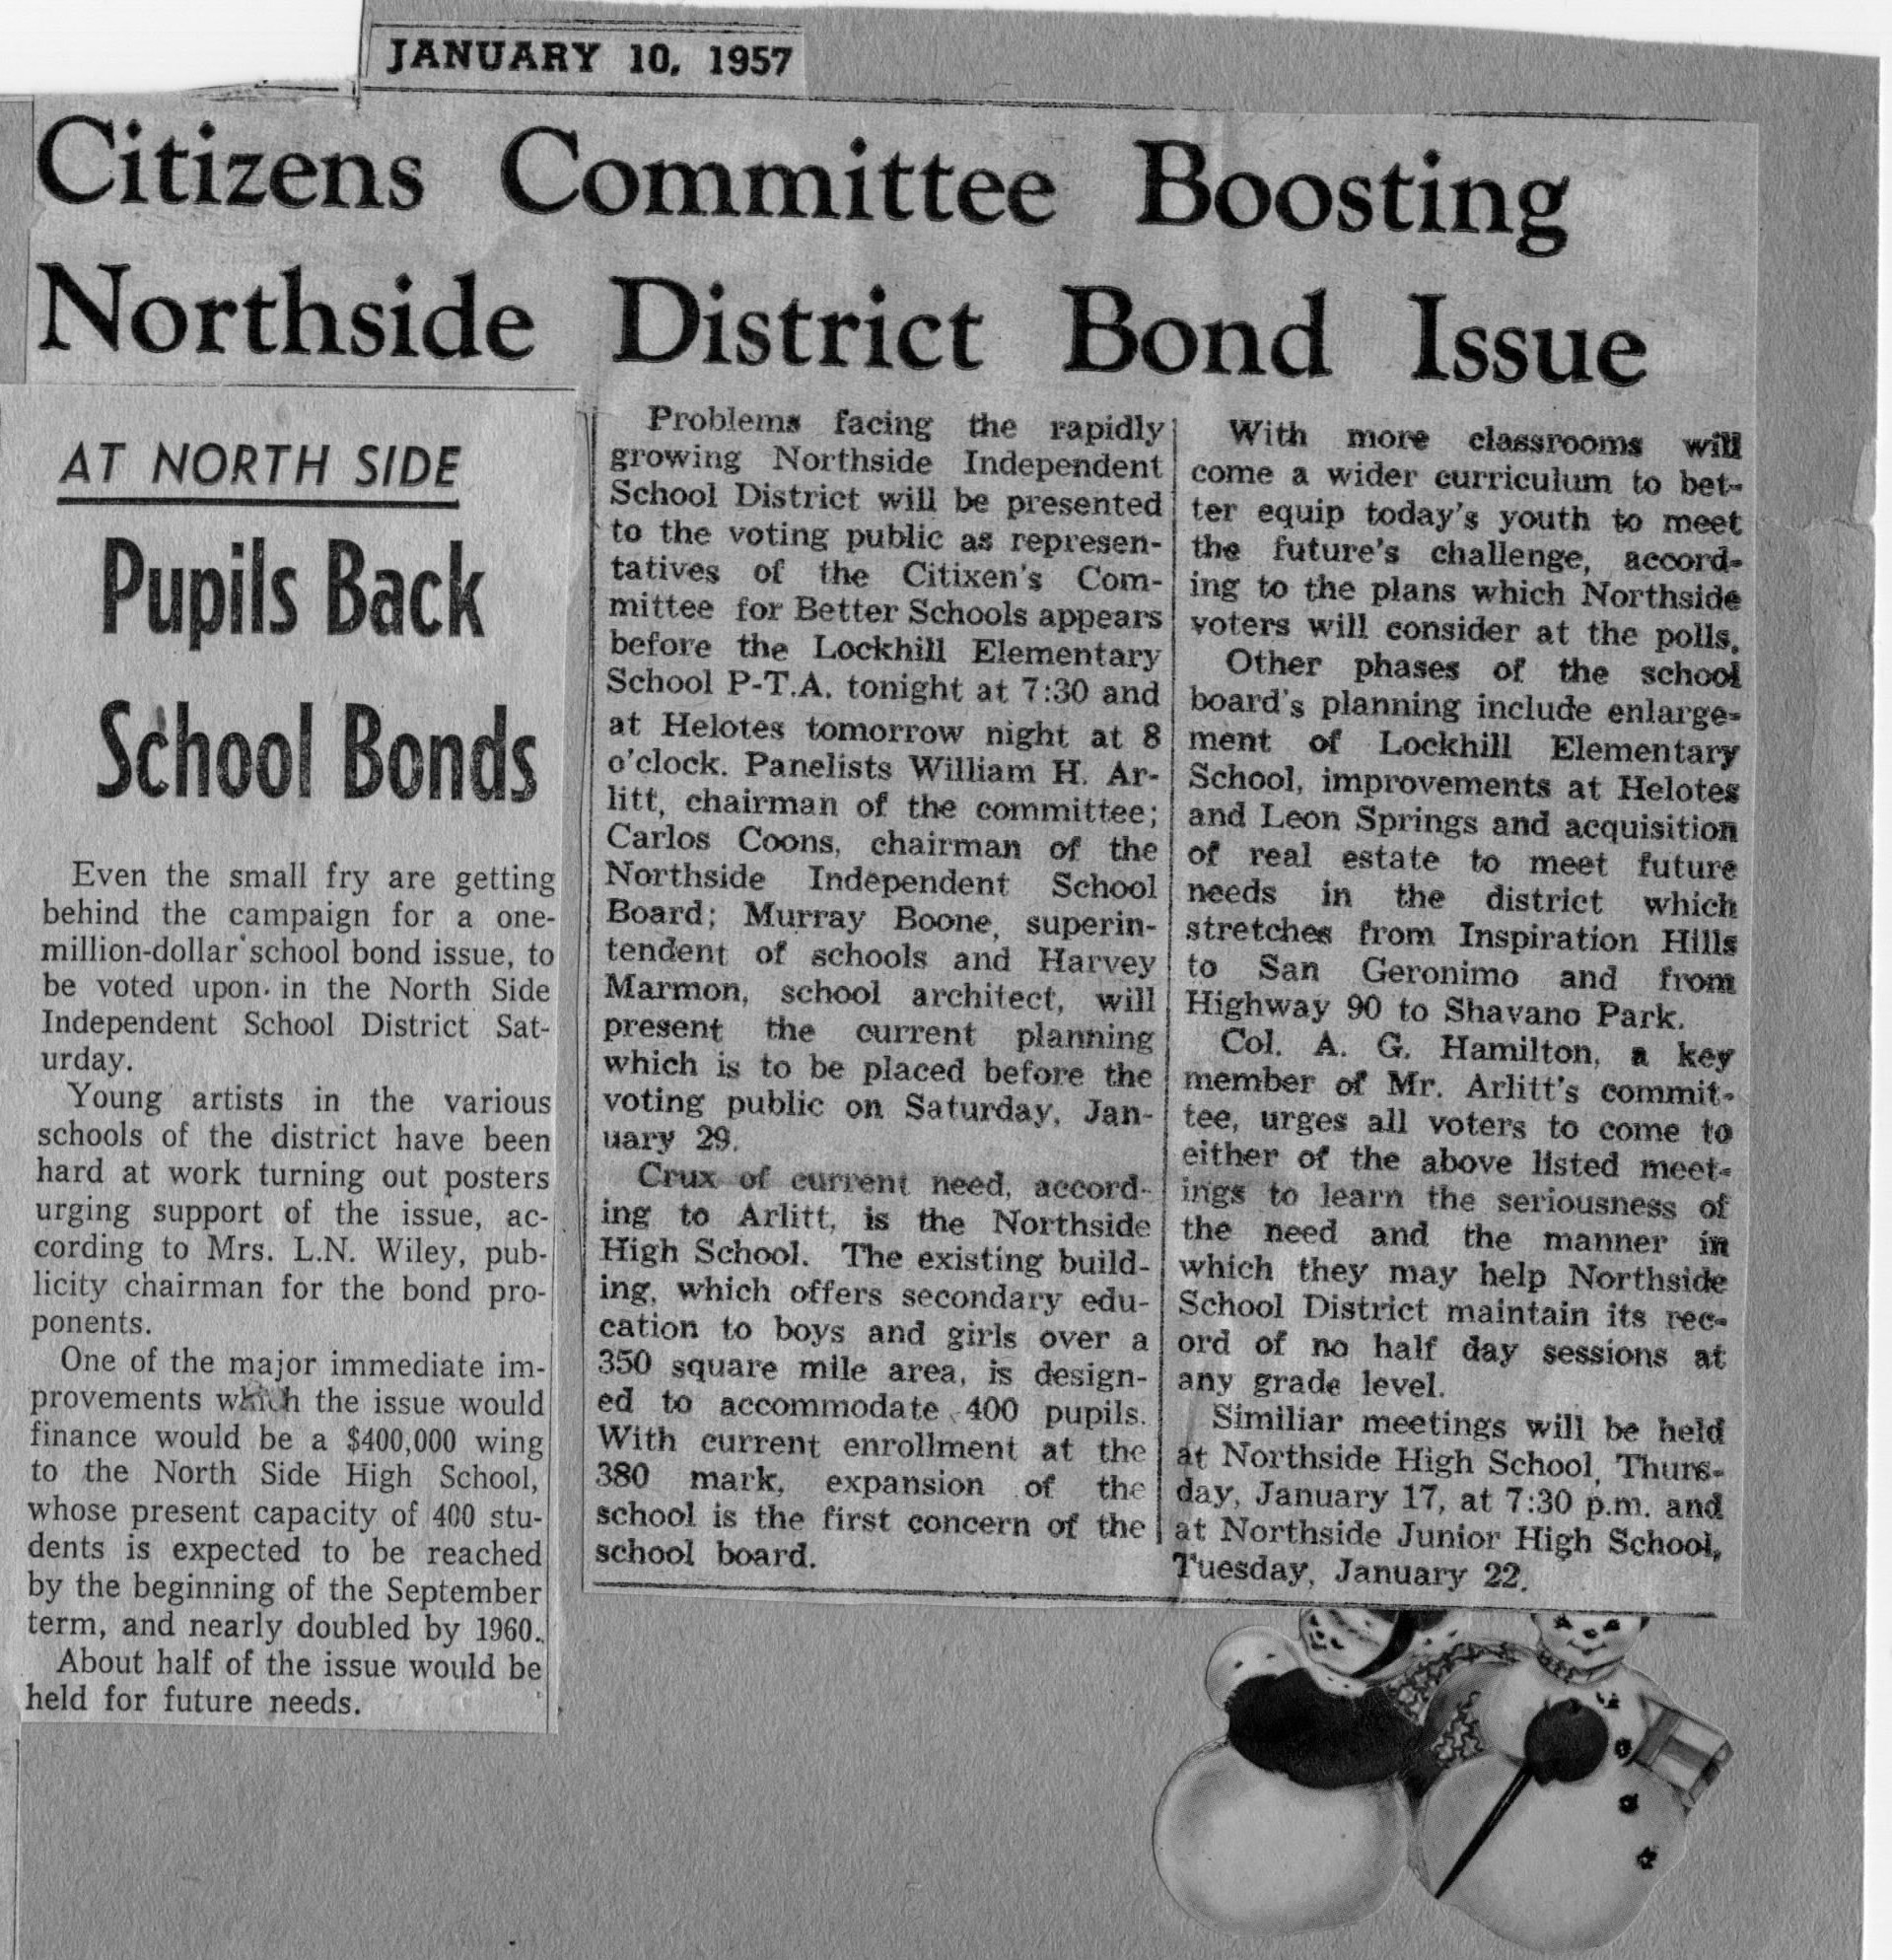 Northside ISD Bond Issue Article